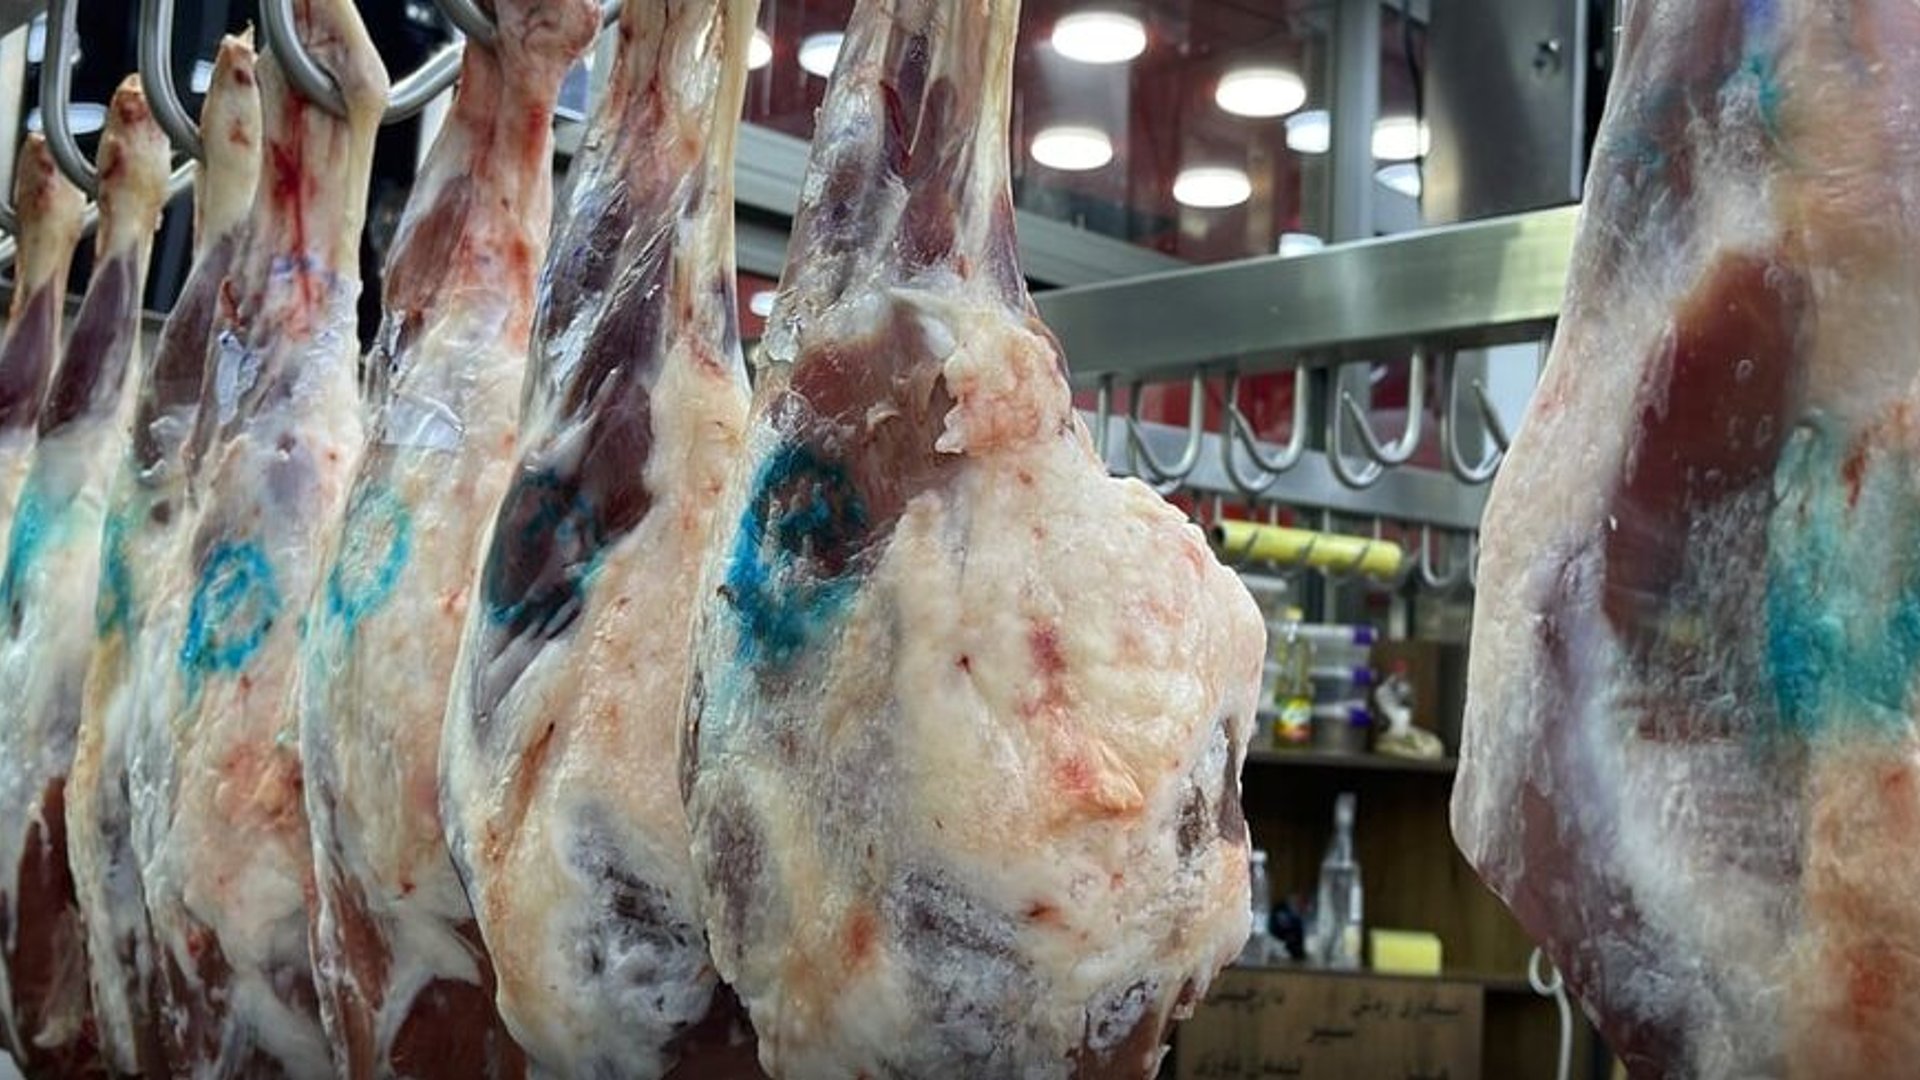 A meat safety conference to be held in Sulaymaniyah